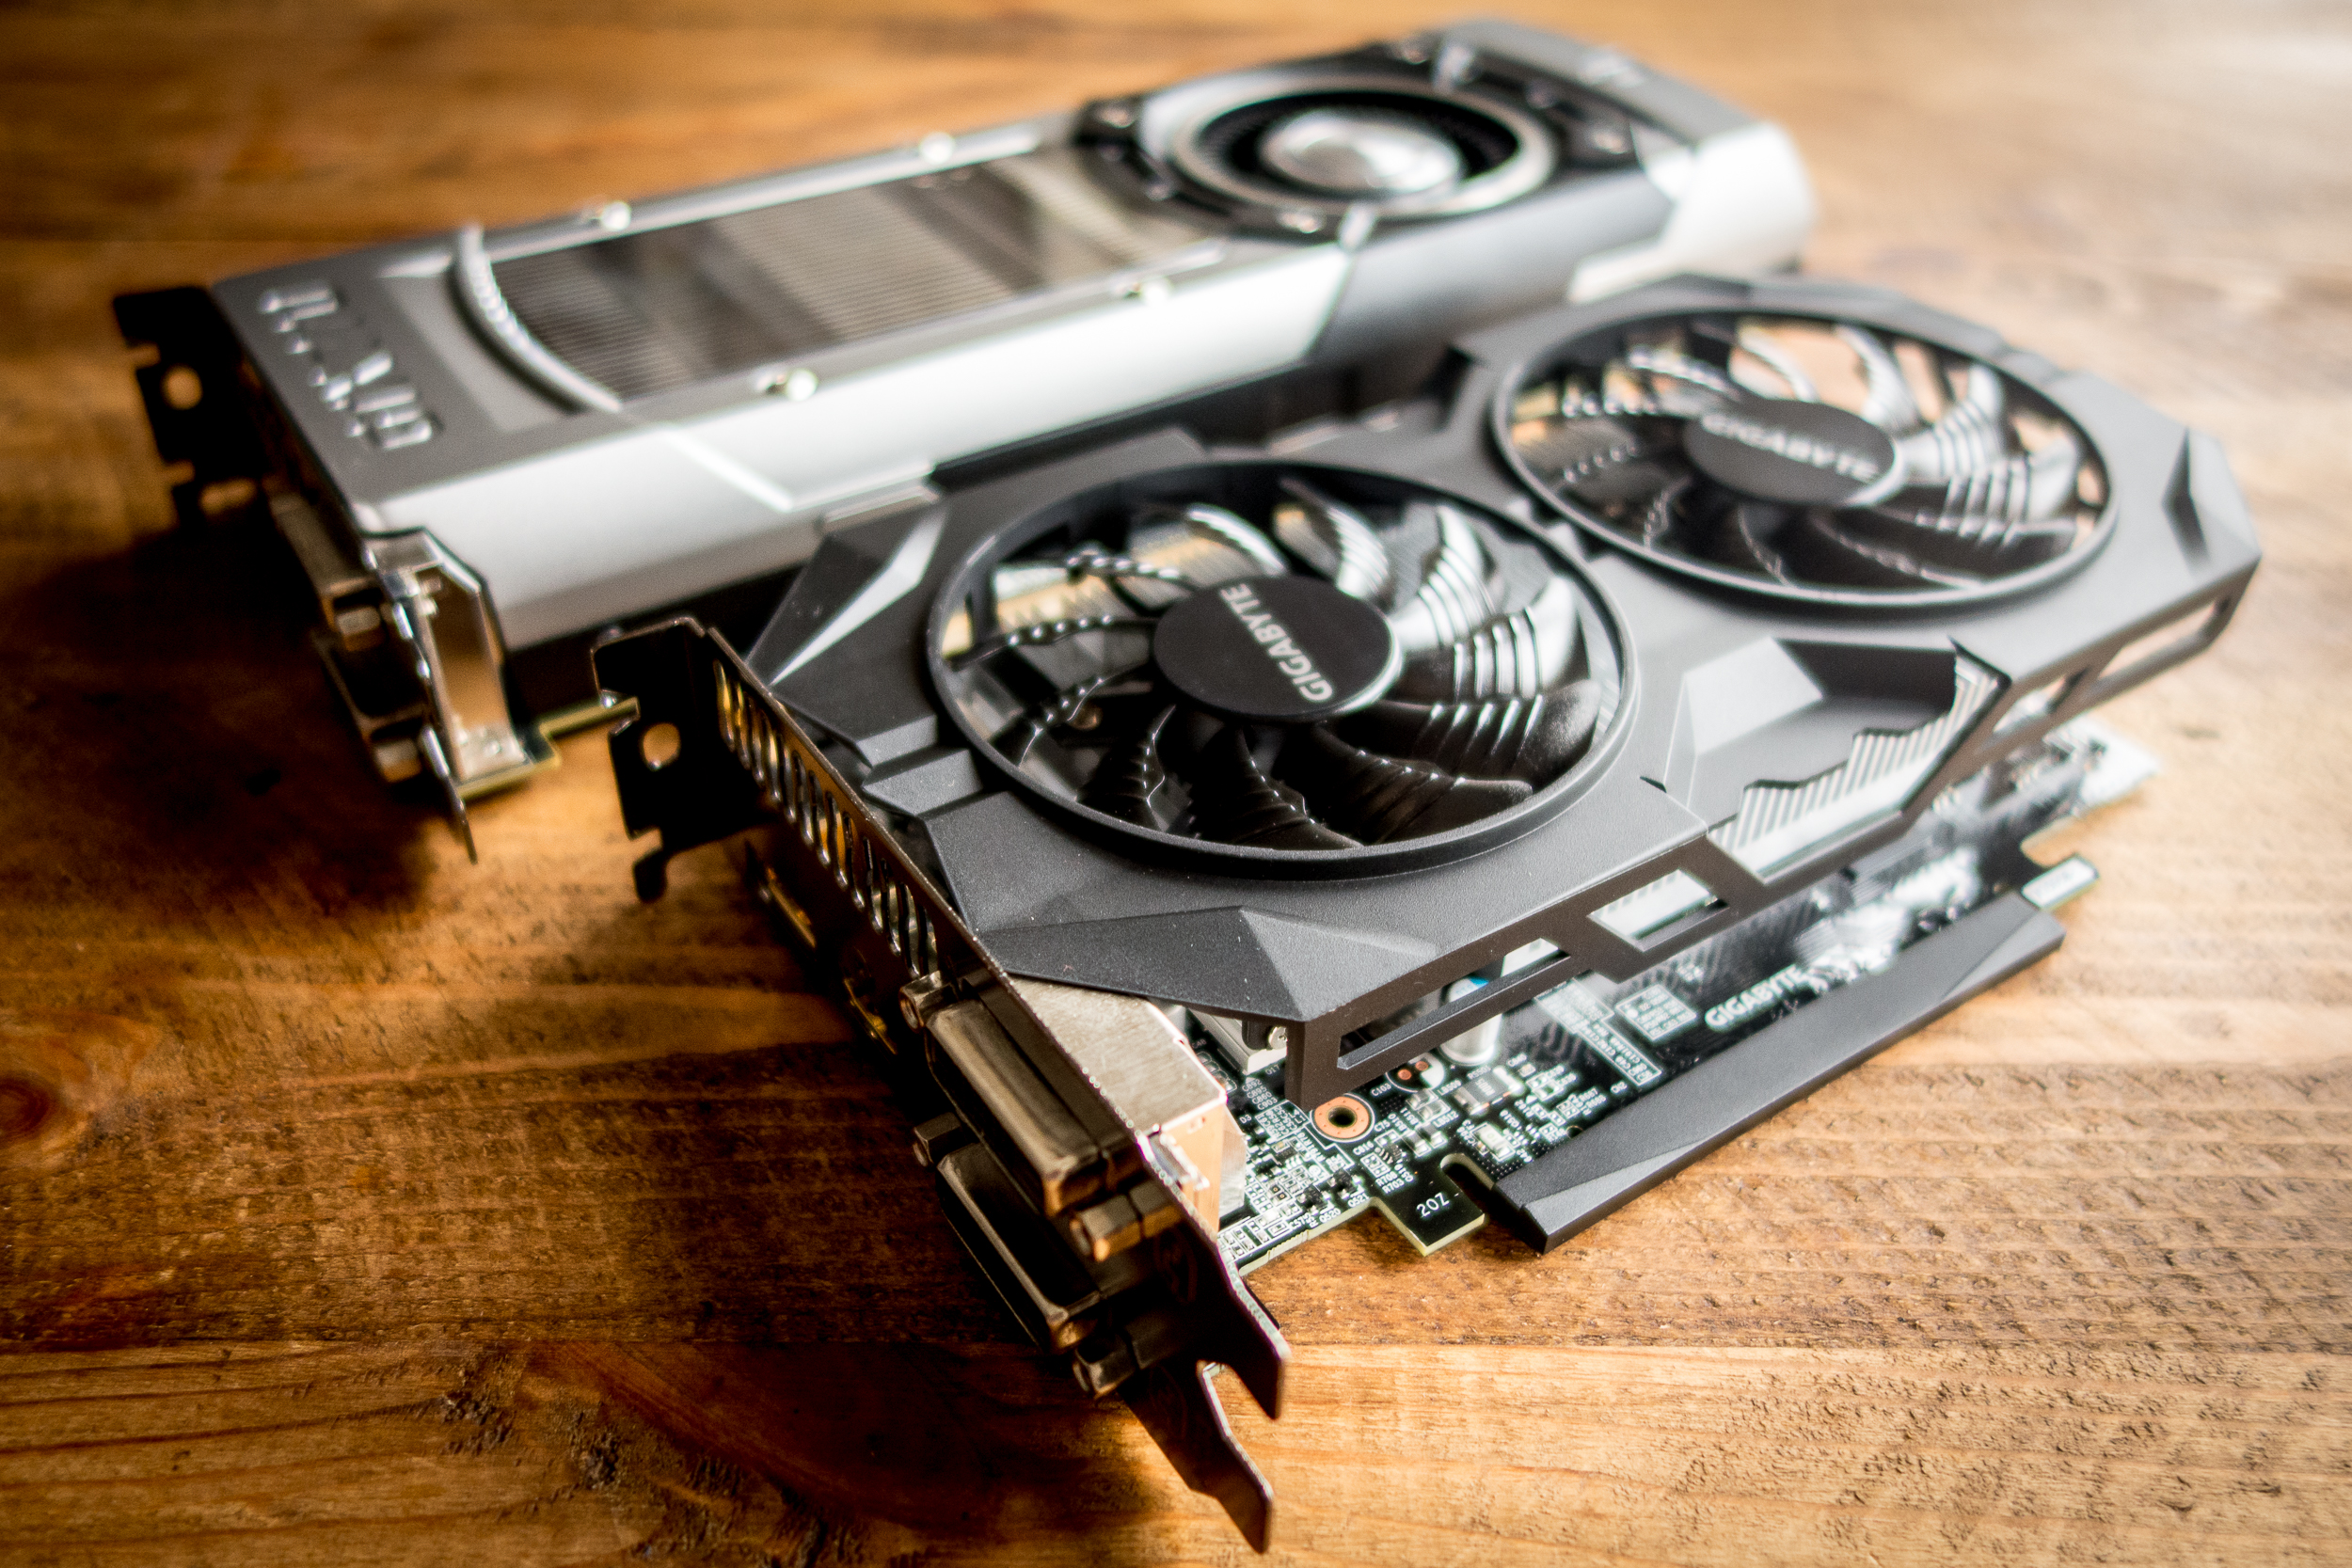 Nvidia's GTX 950 is a highly capable 